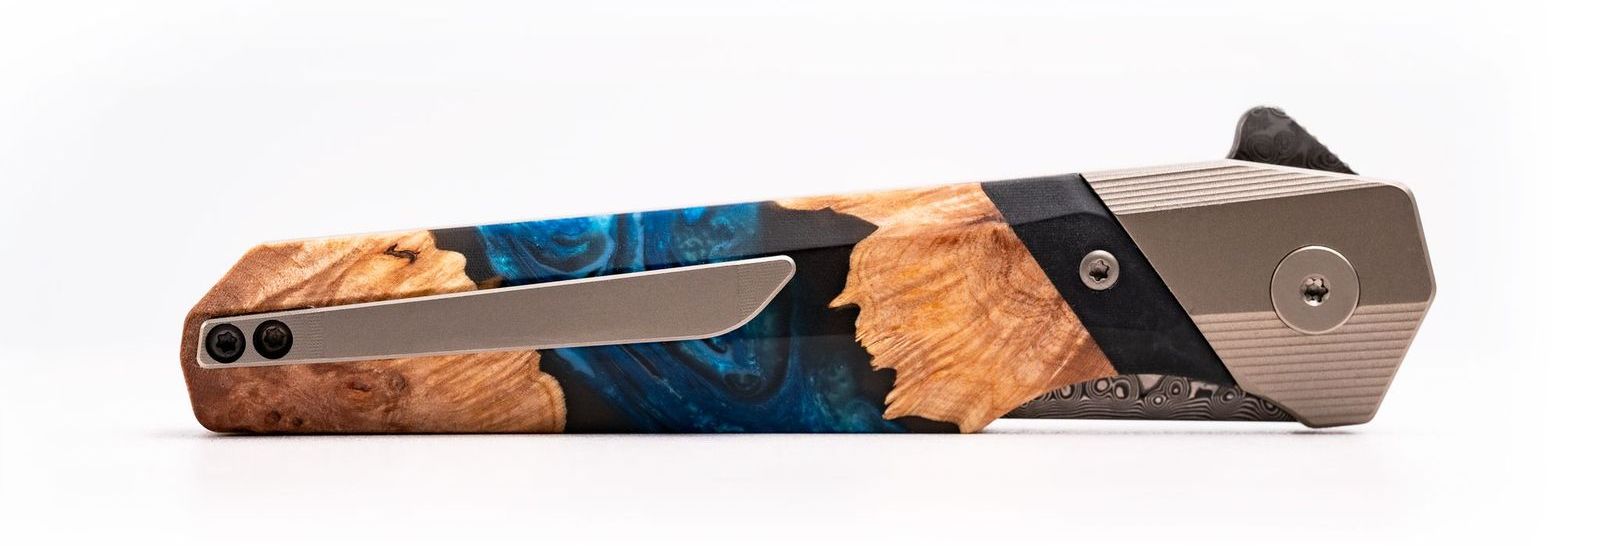 Carved Live Edge Knife whitespace background with pocket clip